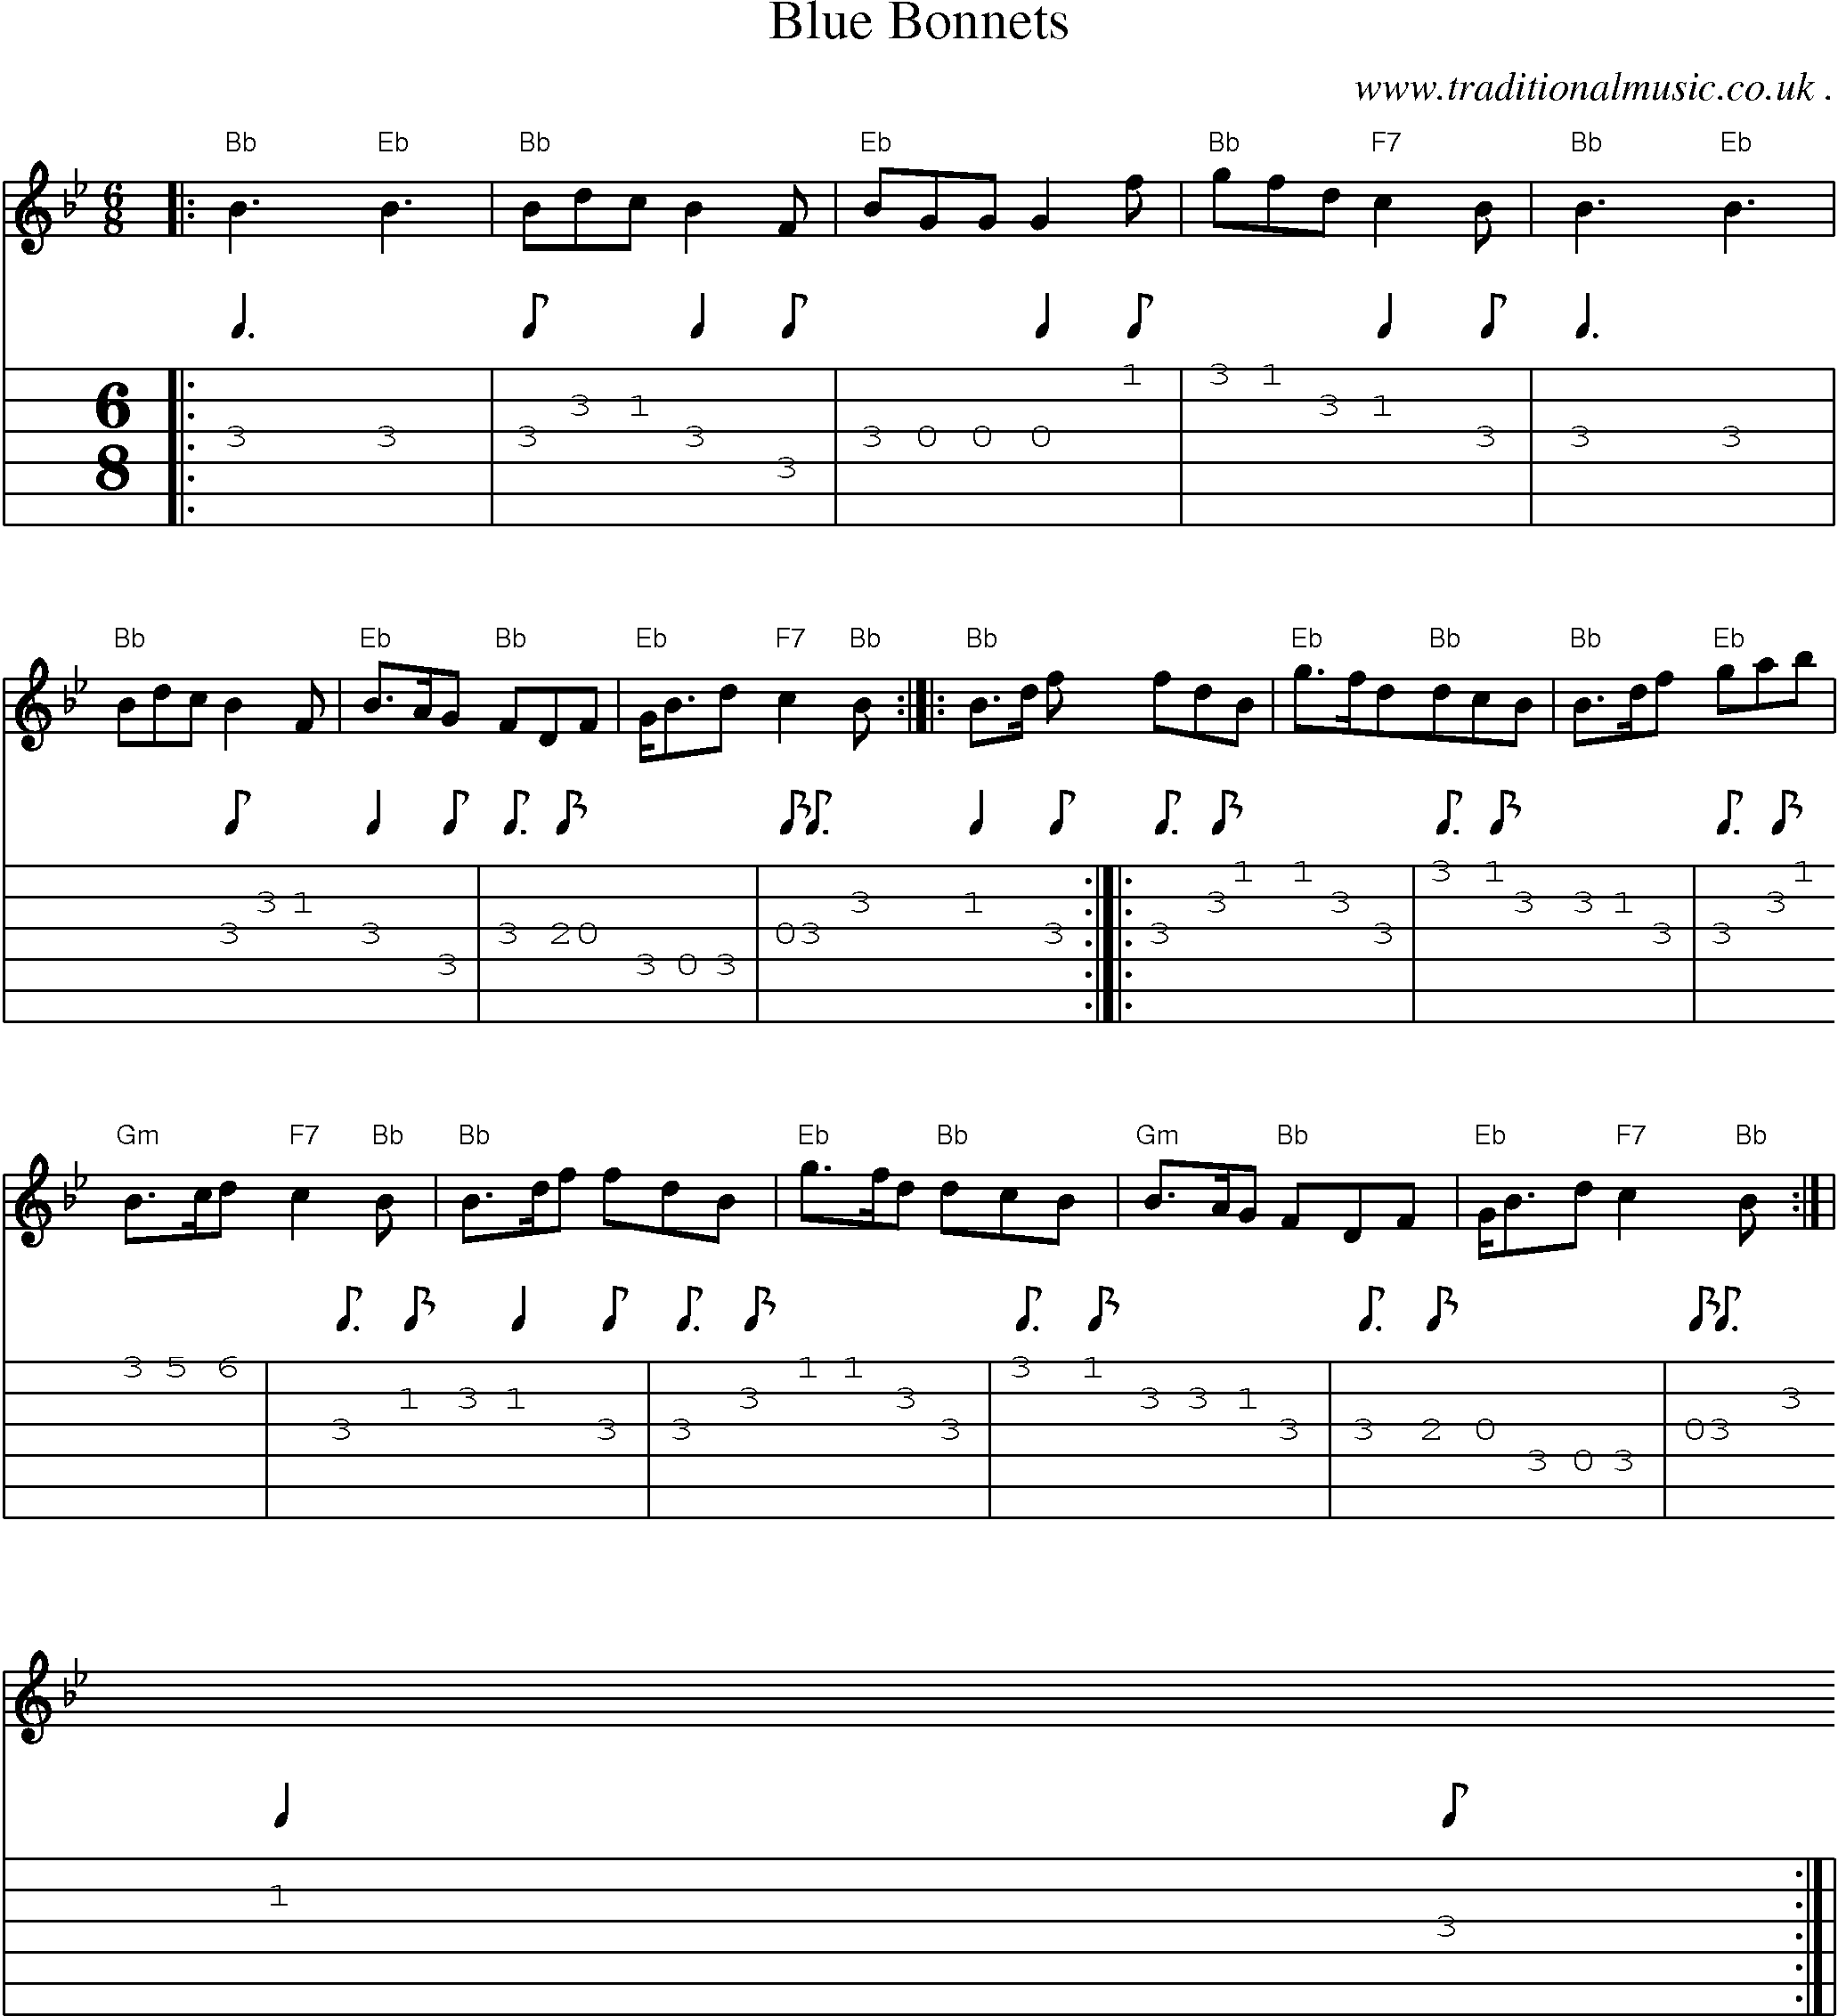 Sheet-music  score, Chords and Guitar Tabs for Blue Bonnets